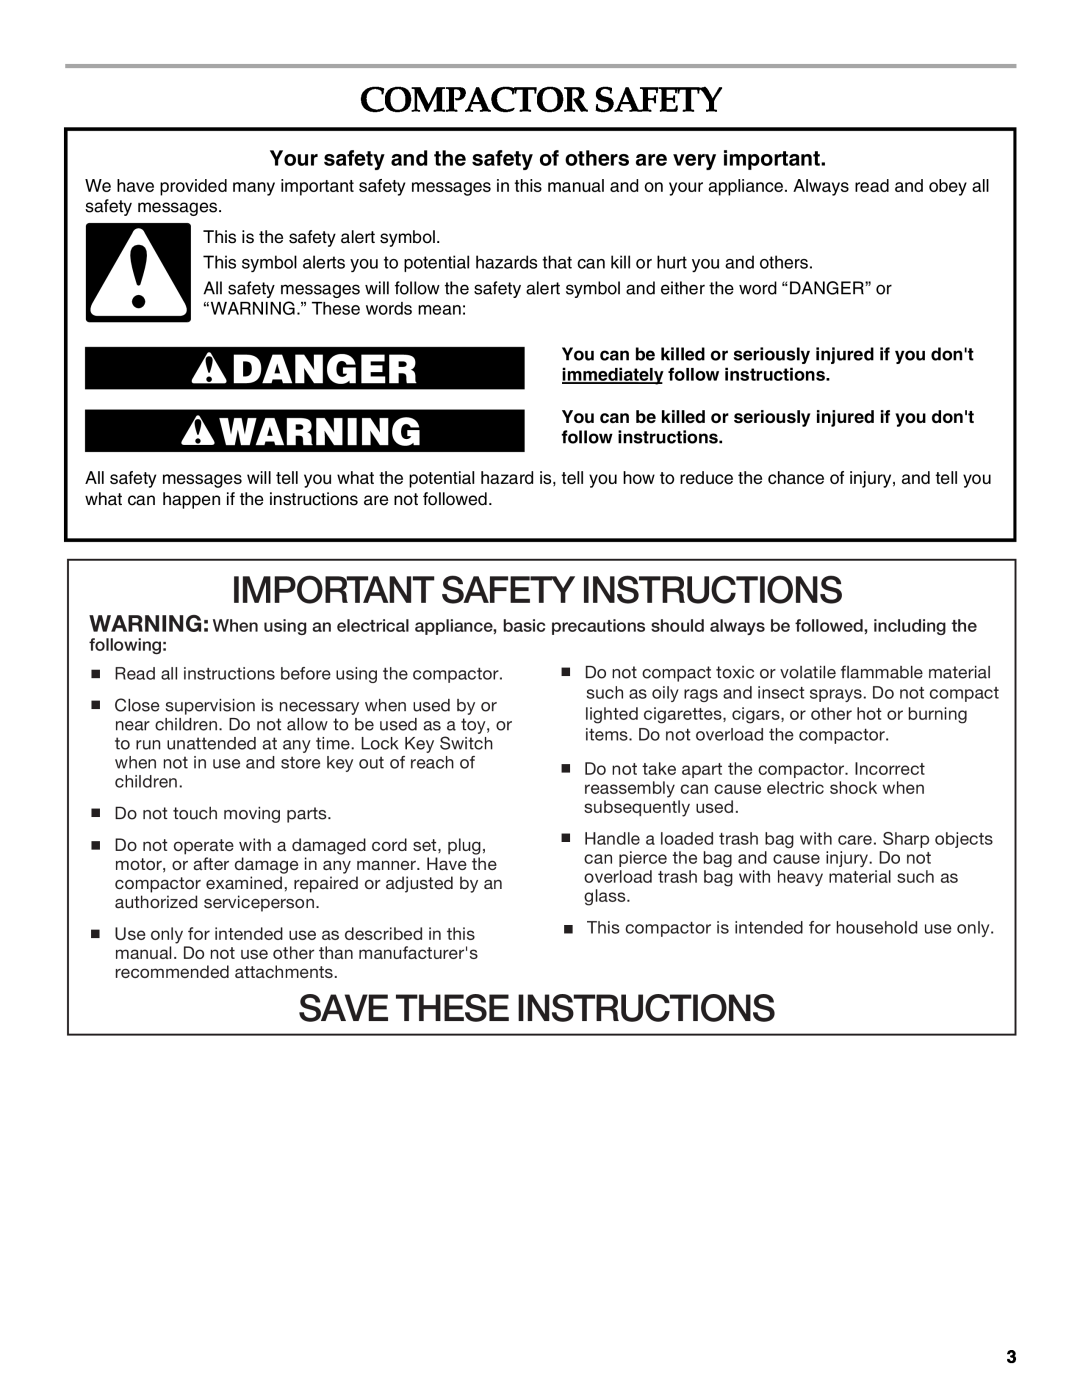 KitchenAid 9871915A manual Compactor Safety, Important Safety Instructions, Save These Instructions 